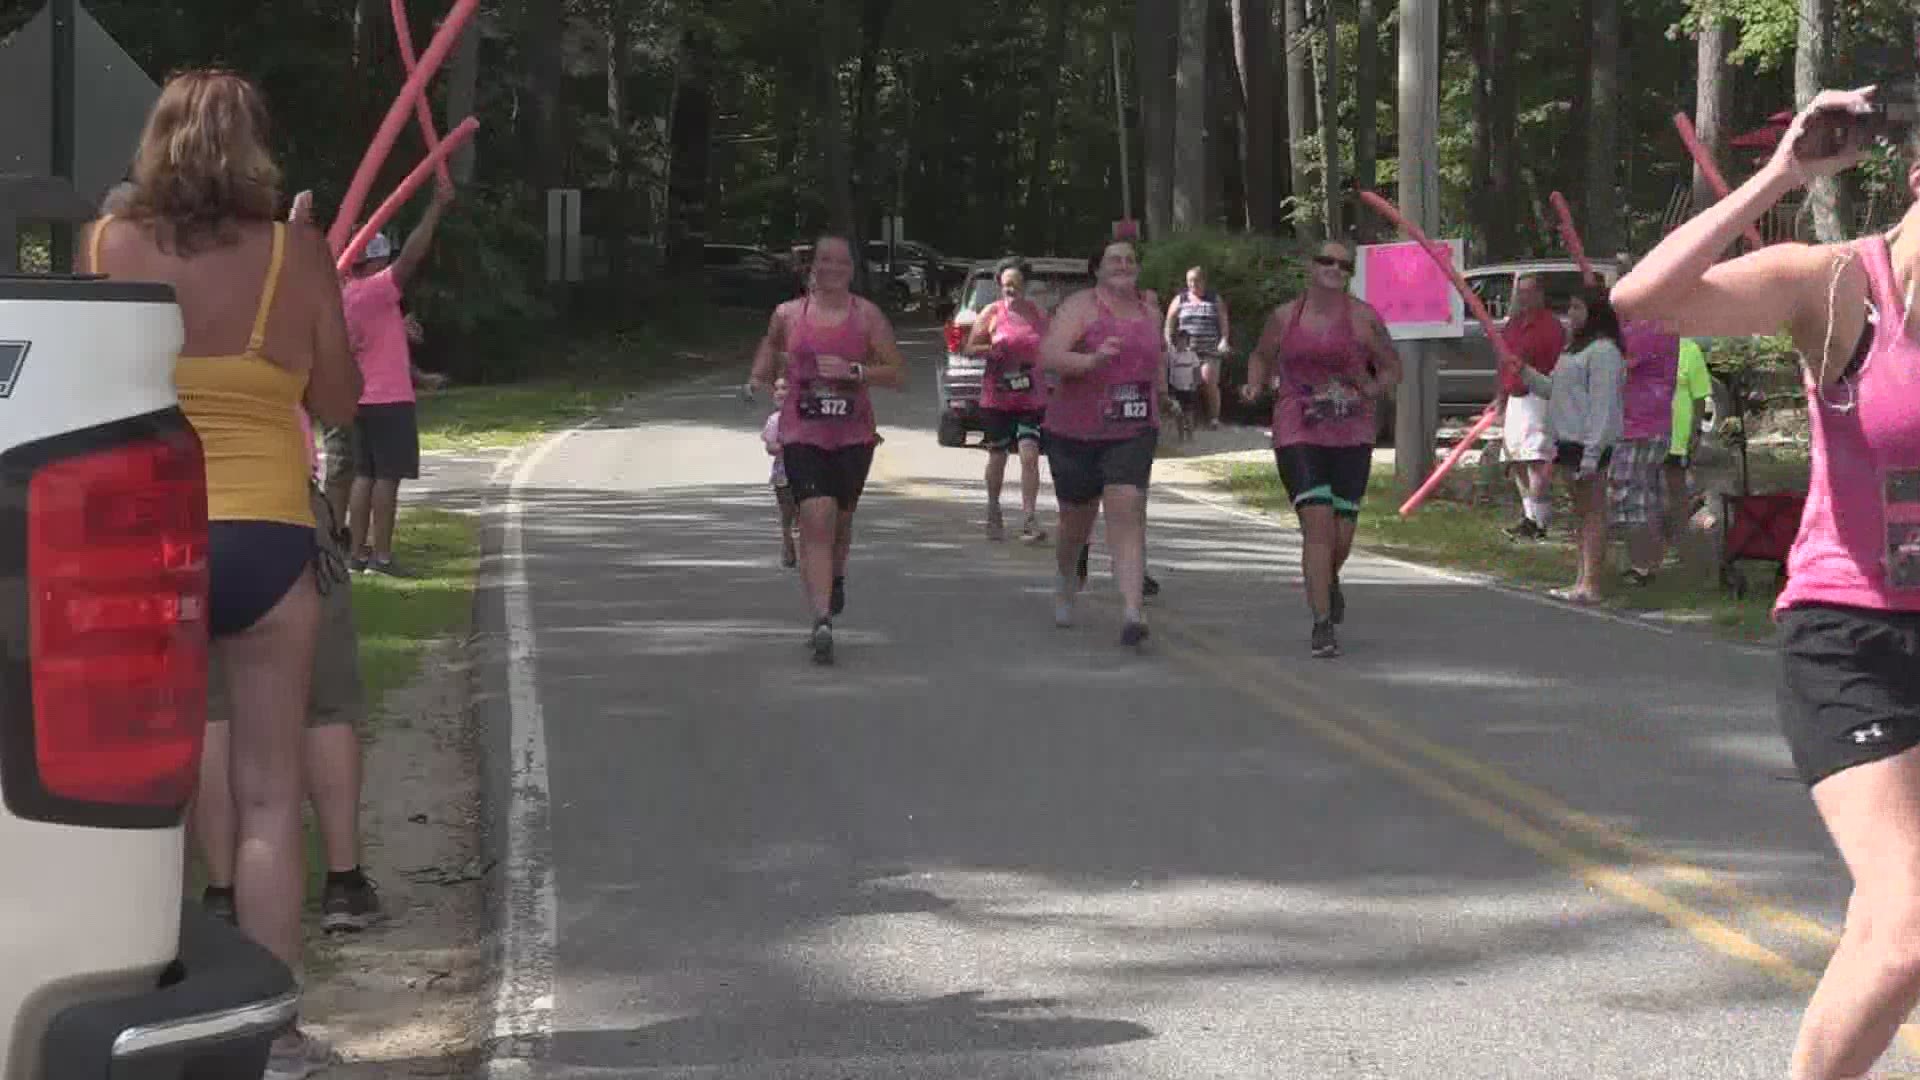 "Tri for a Cure" is Maine's only women-only triathlon, normally held annually in South Portland.